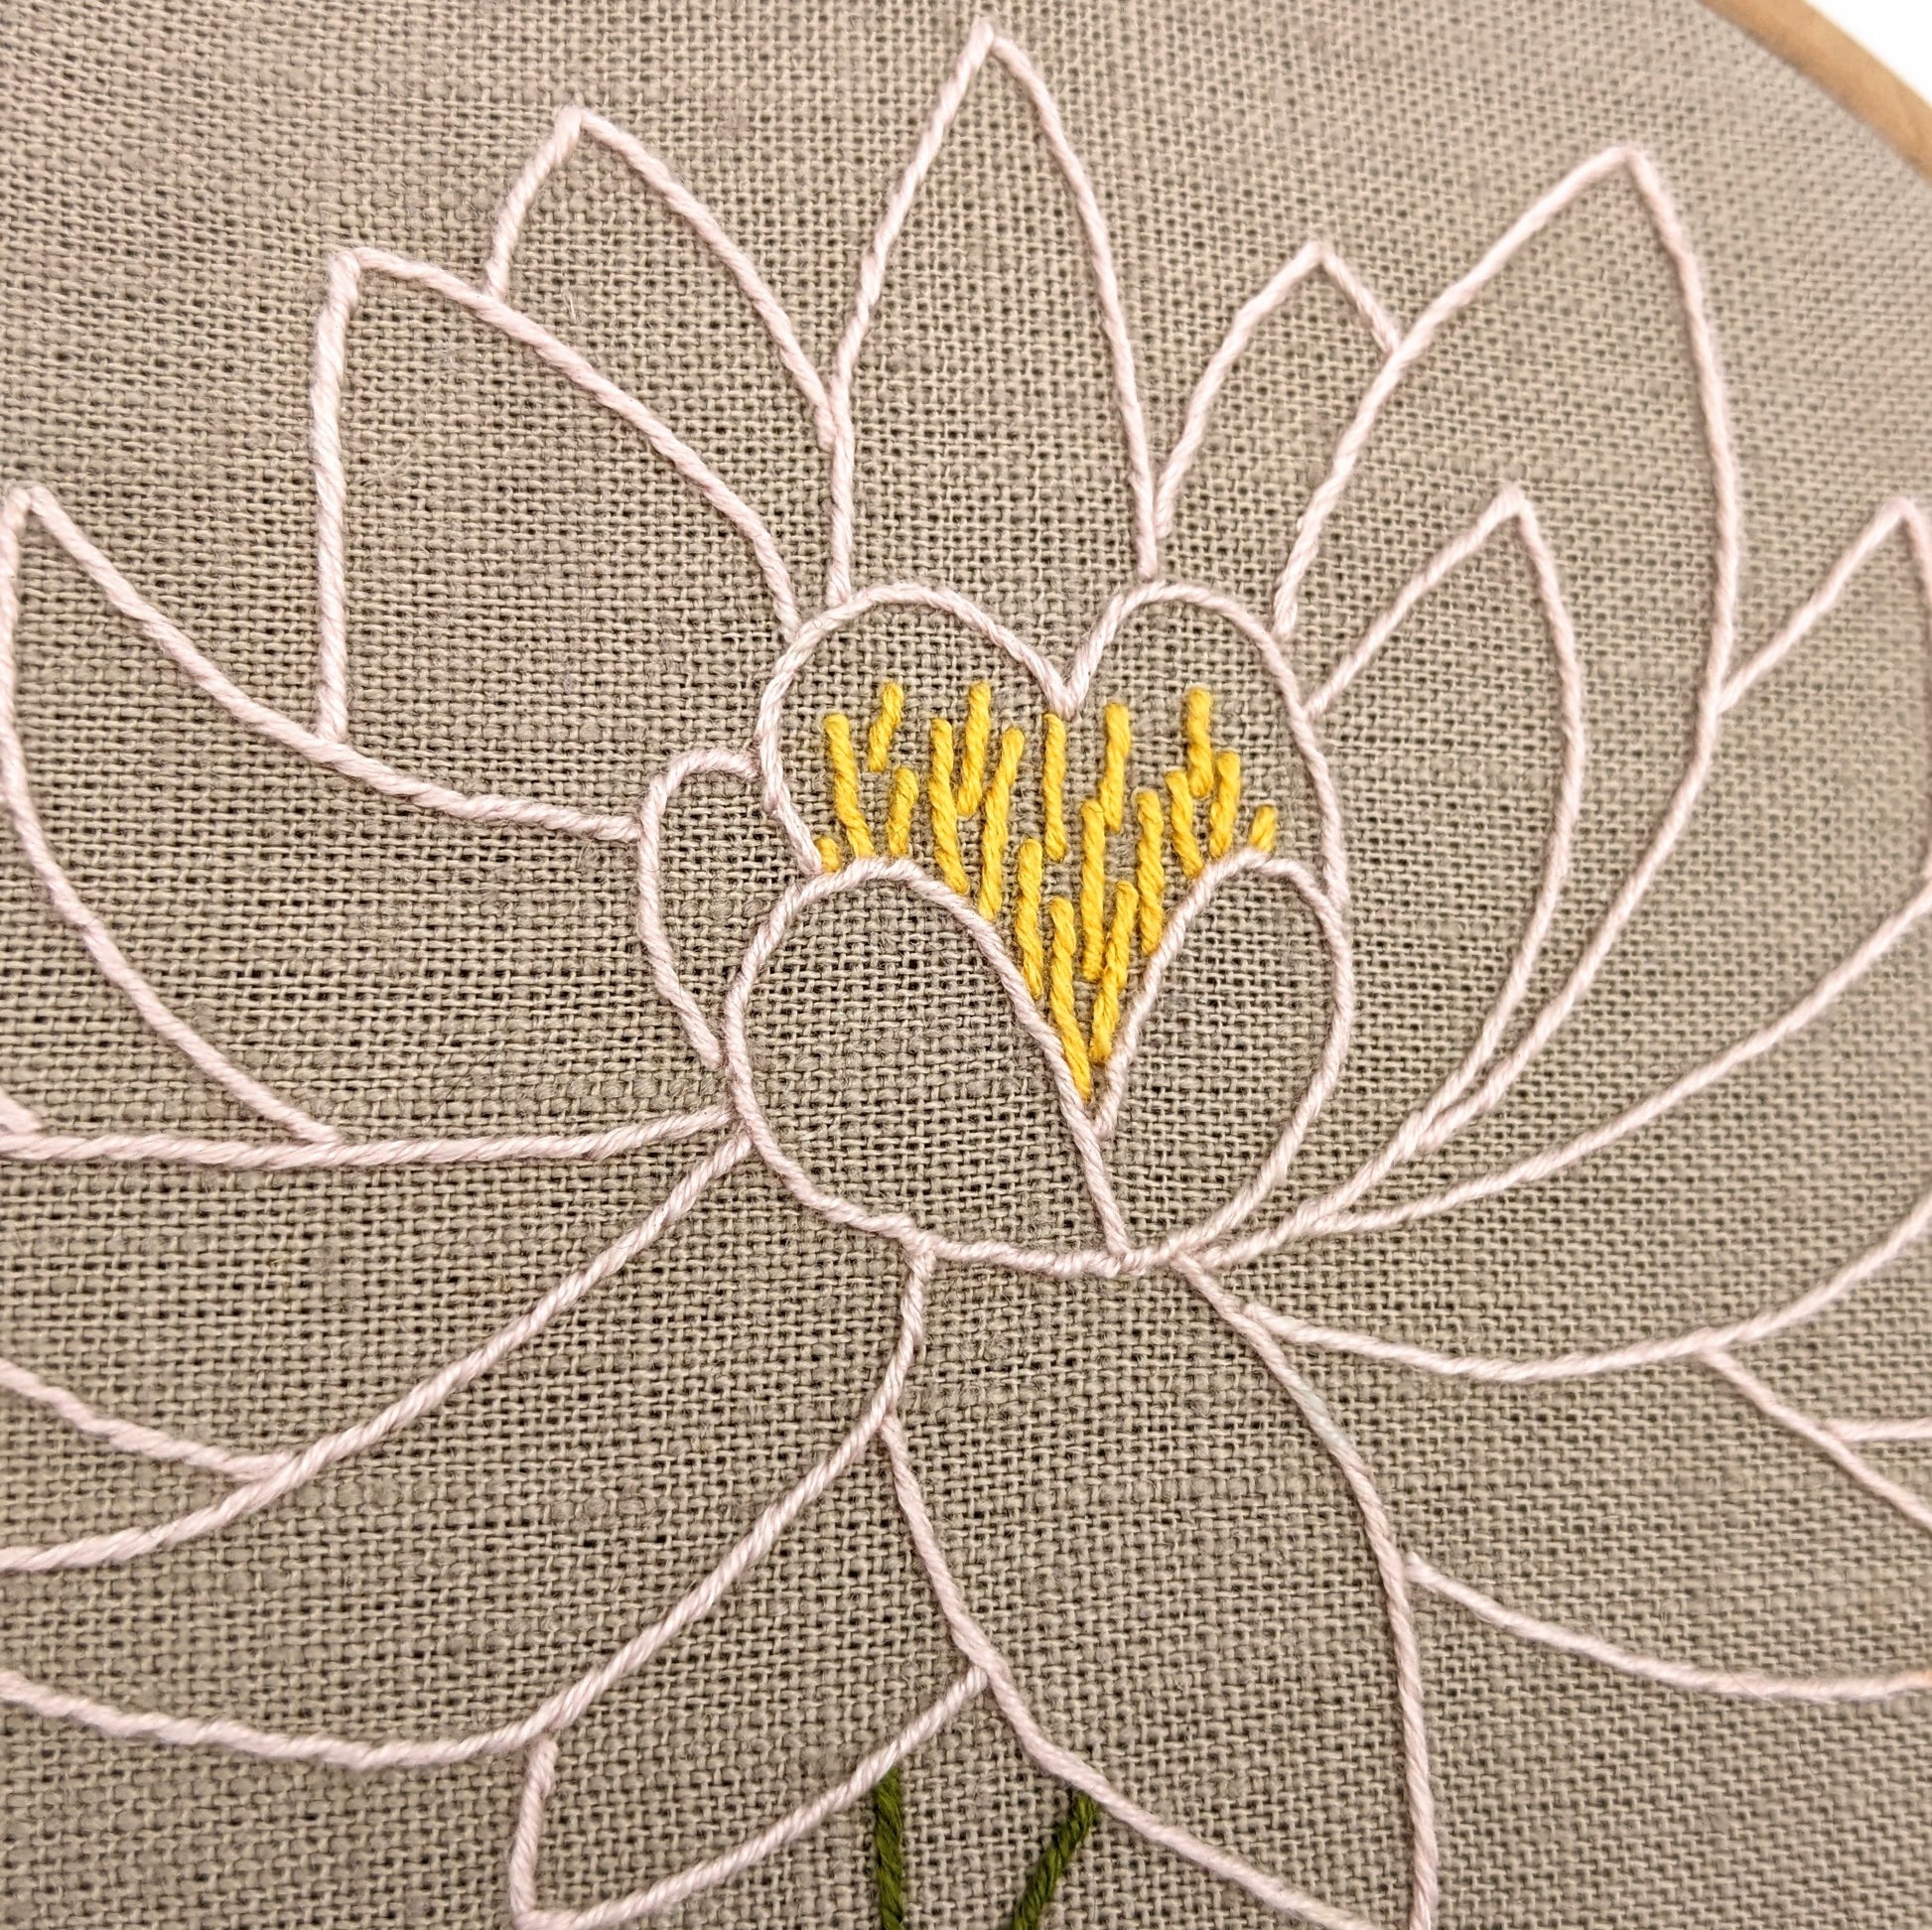 Water Lily Flower Embroidery Hoop Art – Noa Samson Embroidery